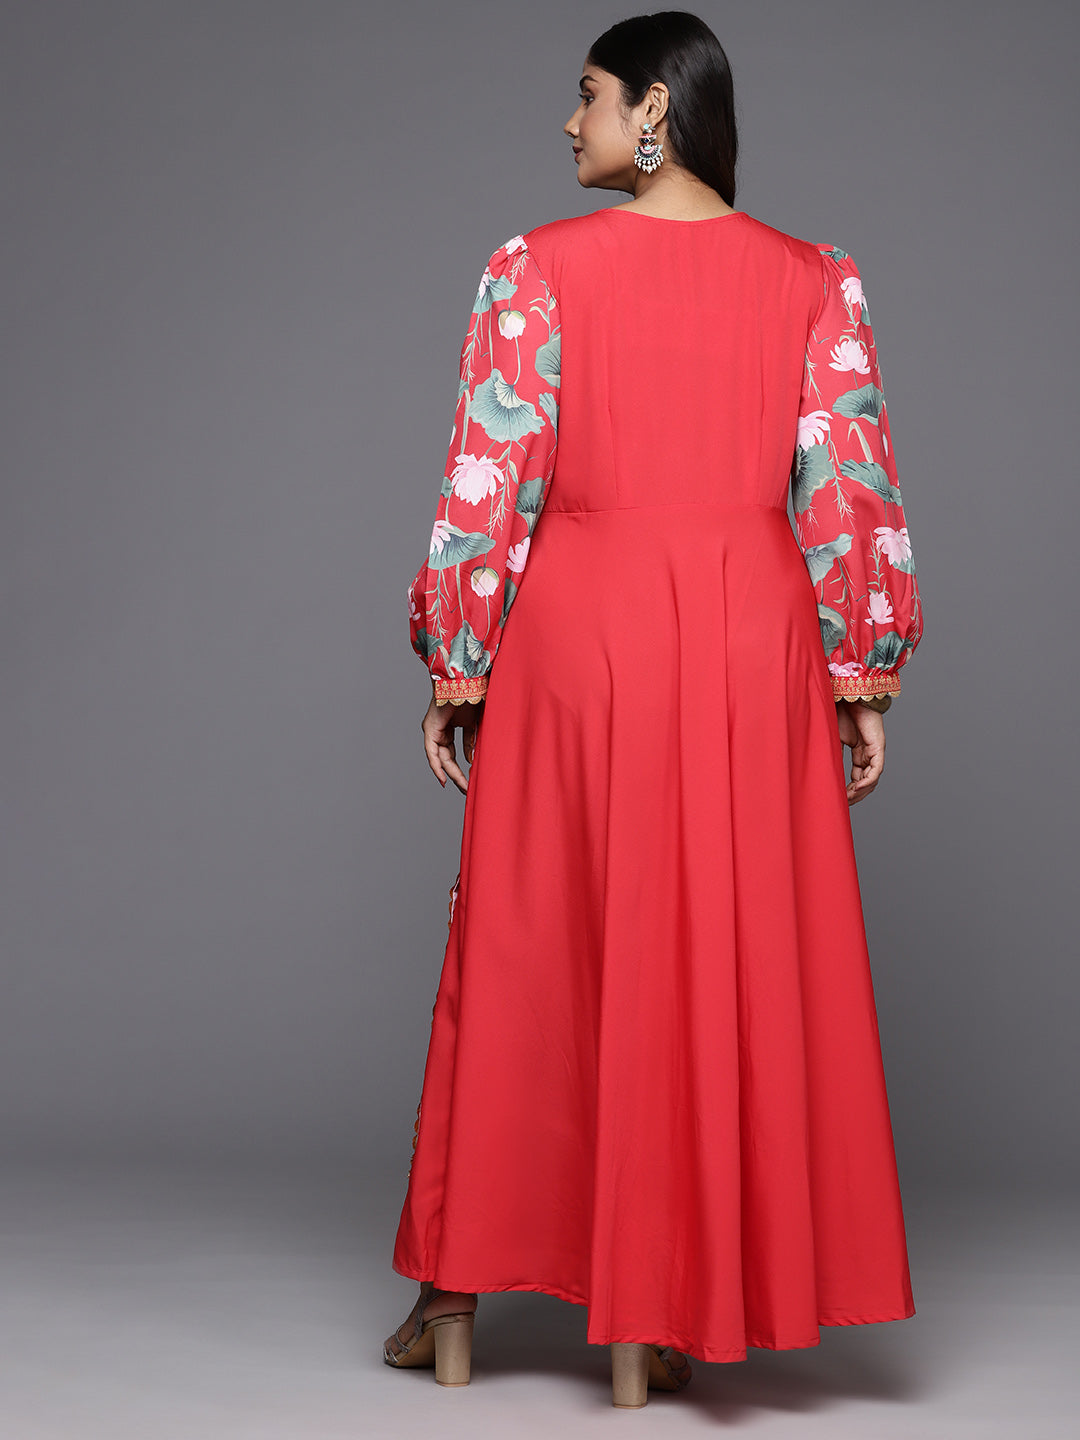 Modest Red Line A Wedding Dress With Off Shoulder Applique And Chapel Train  For Nigerian Bride Perfect For The Middle East Church From Beautyday,  $146.64 | DHgate.Com